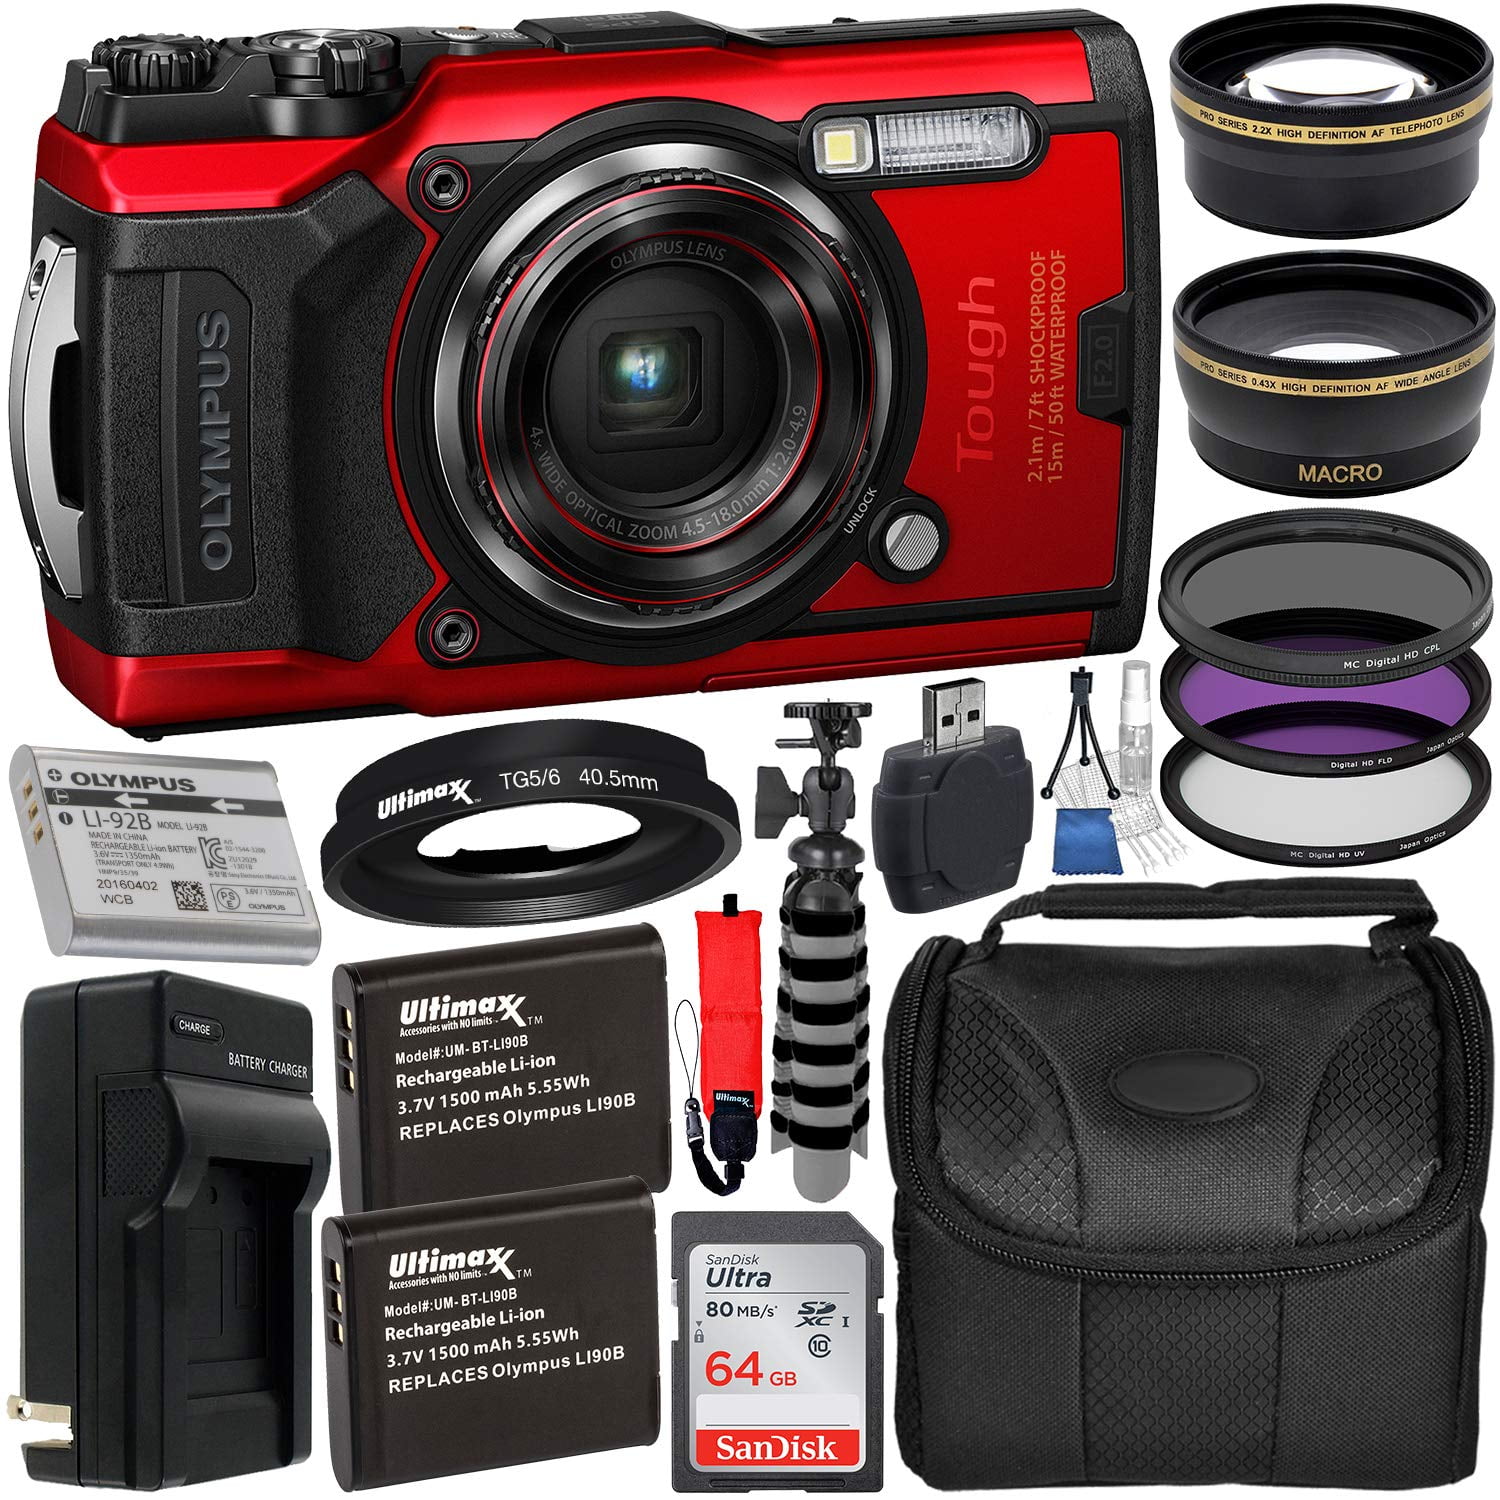 Tough TG-6 Digital Camera with Deluxe Accessory Bundle – Includes: SanDisk Ultra 64GB SDXC Memory Card + 2X Seller's Replacement Batteries with Charger + Adapter Tube + Much More - Walmart.com